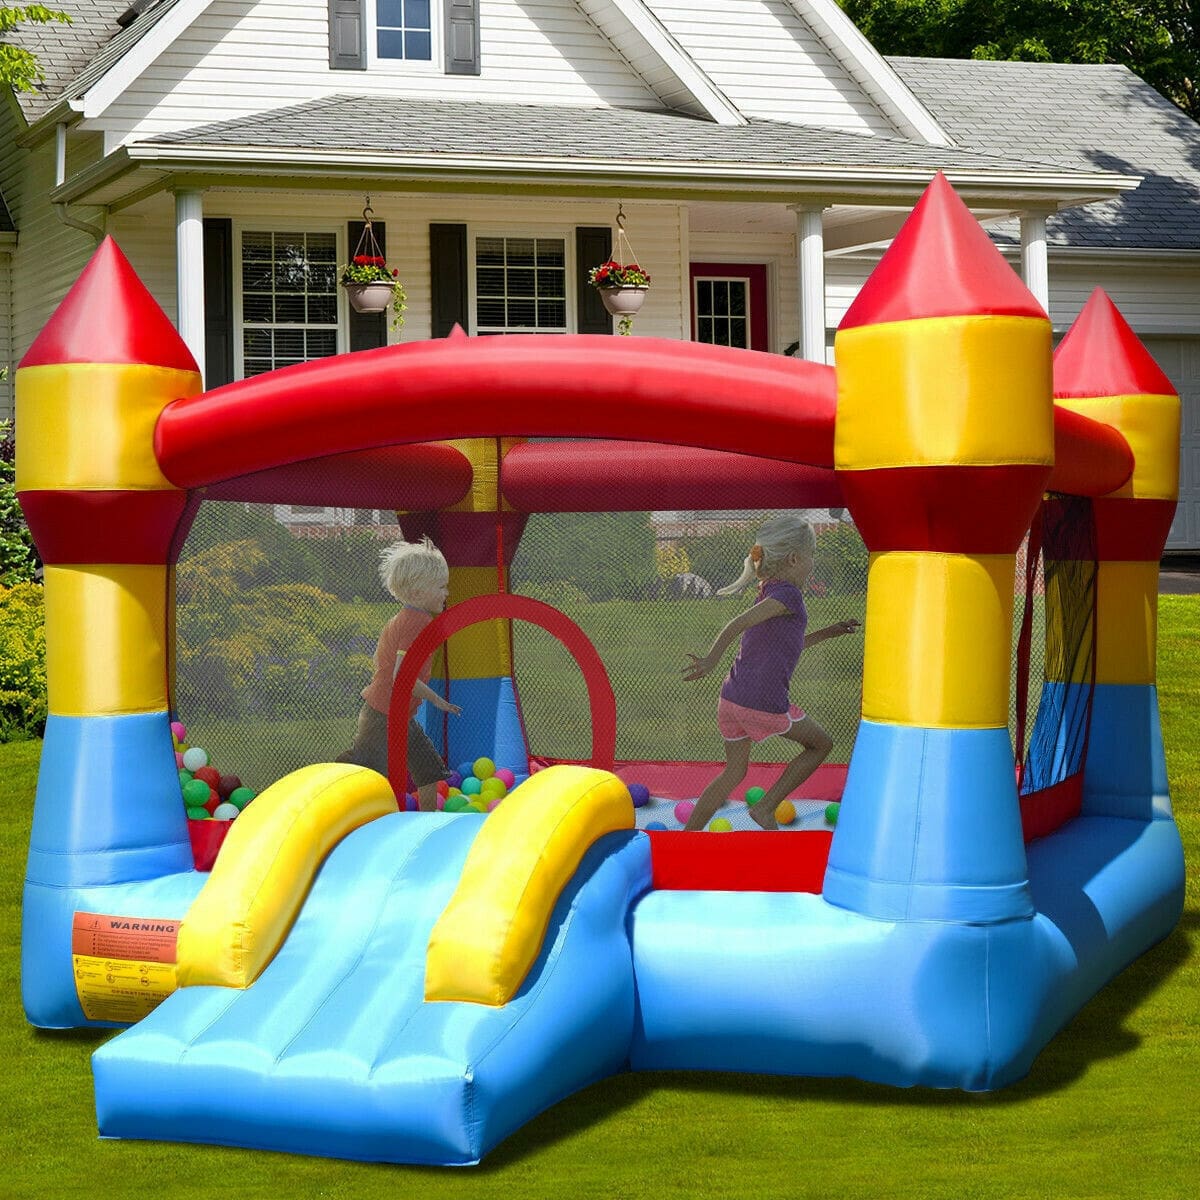 Inflatable Bounce House - Kids Inflatable Playhouse Trampoline -  Blow Up Bounce House for Kids with Blower - EZInflatable  Castle